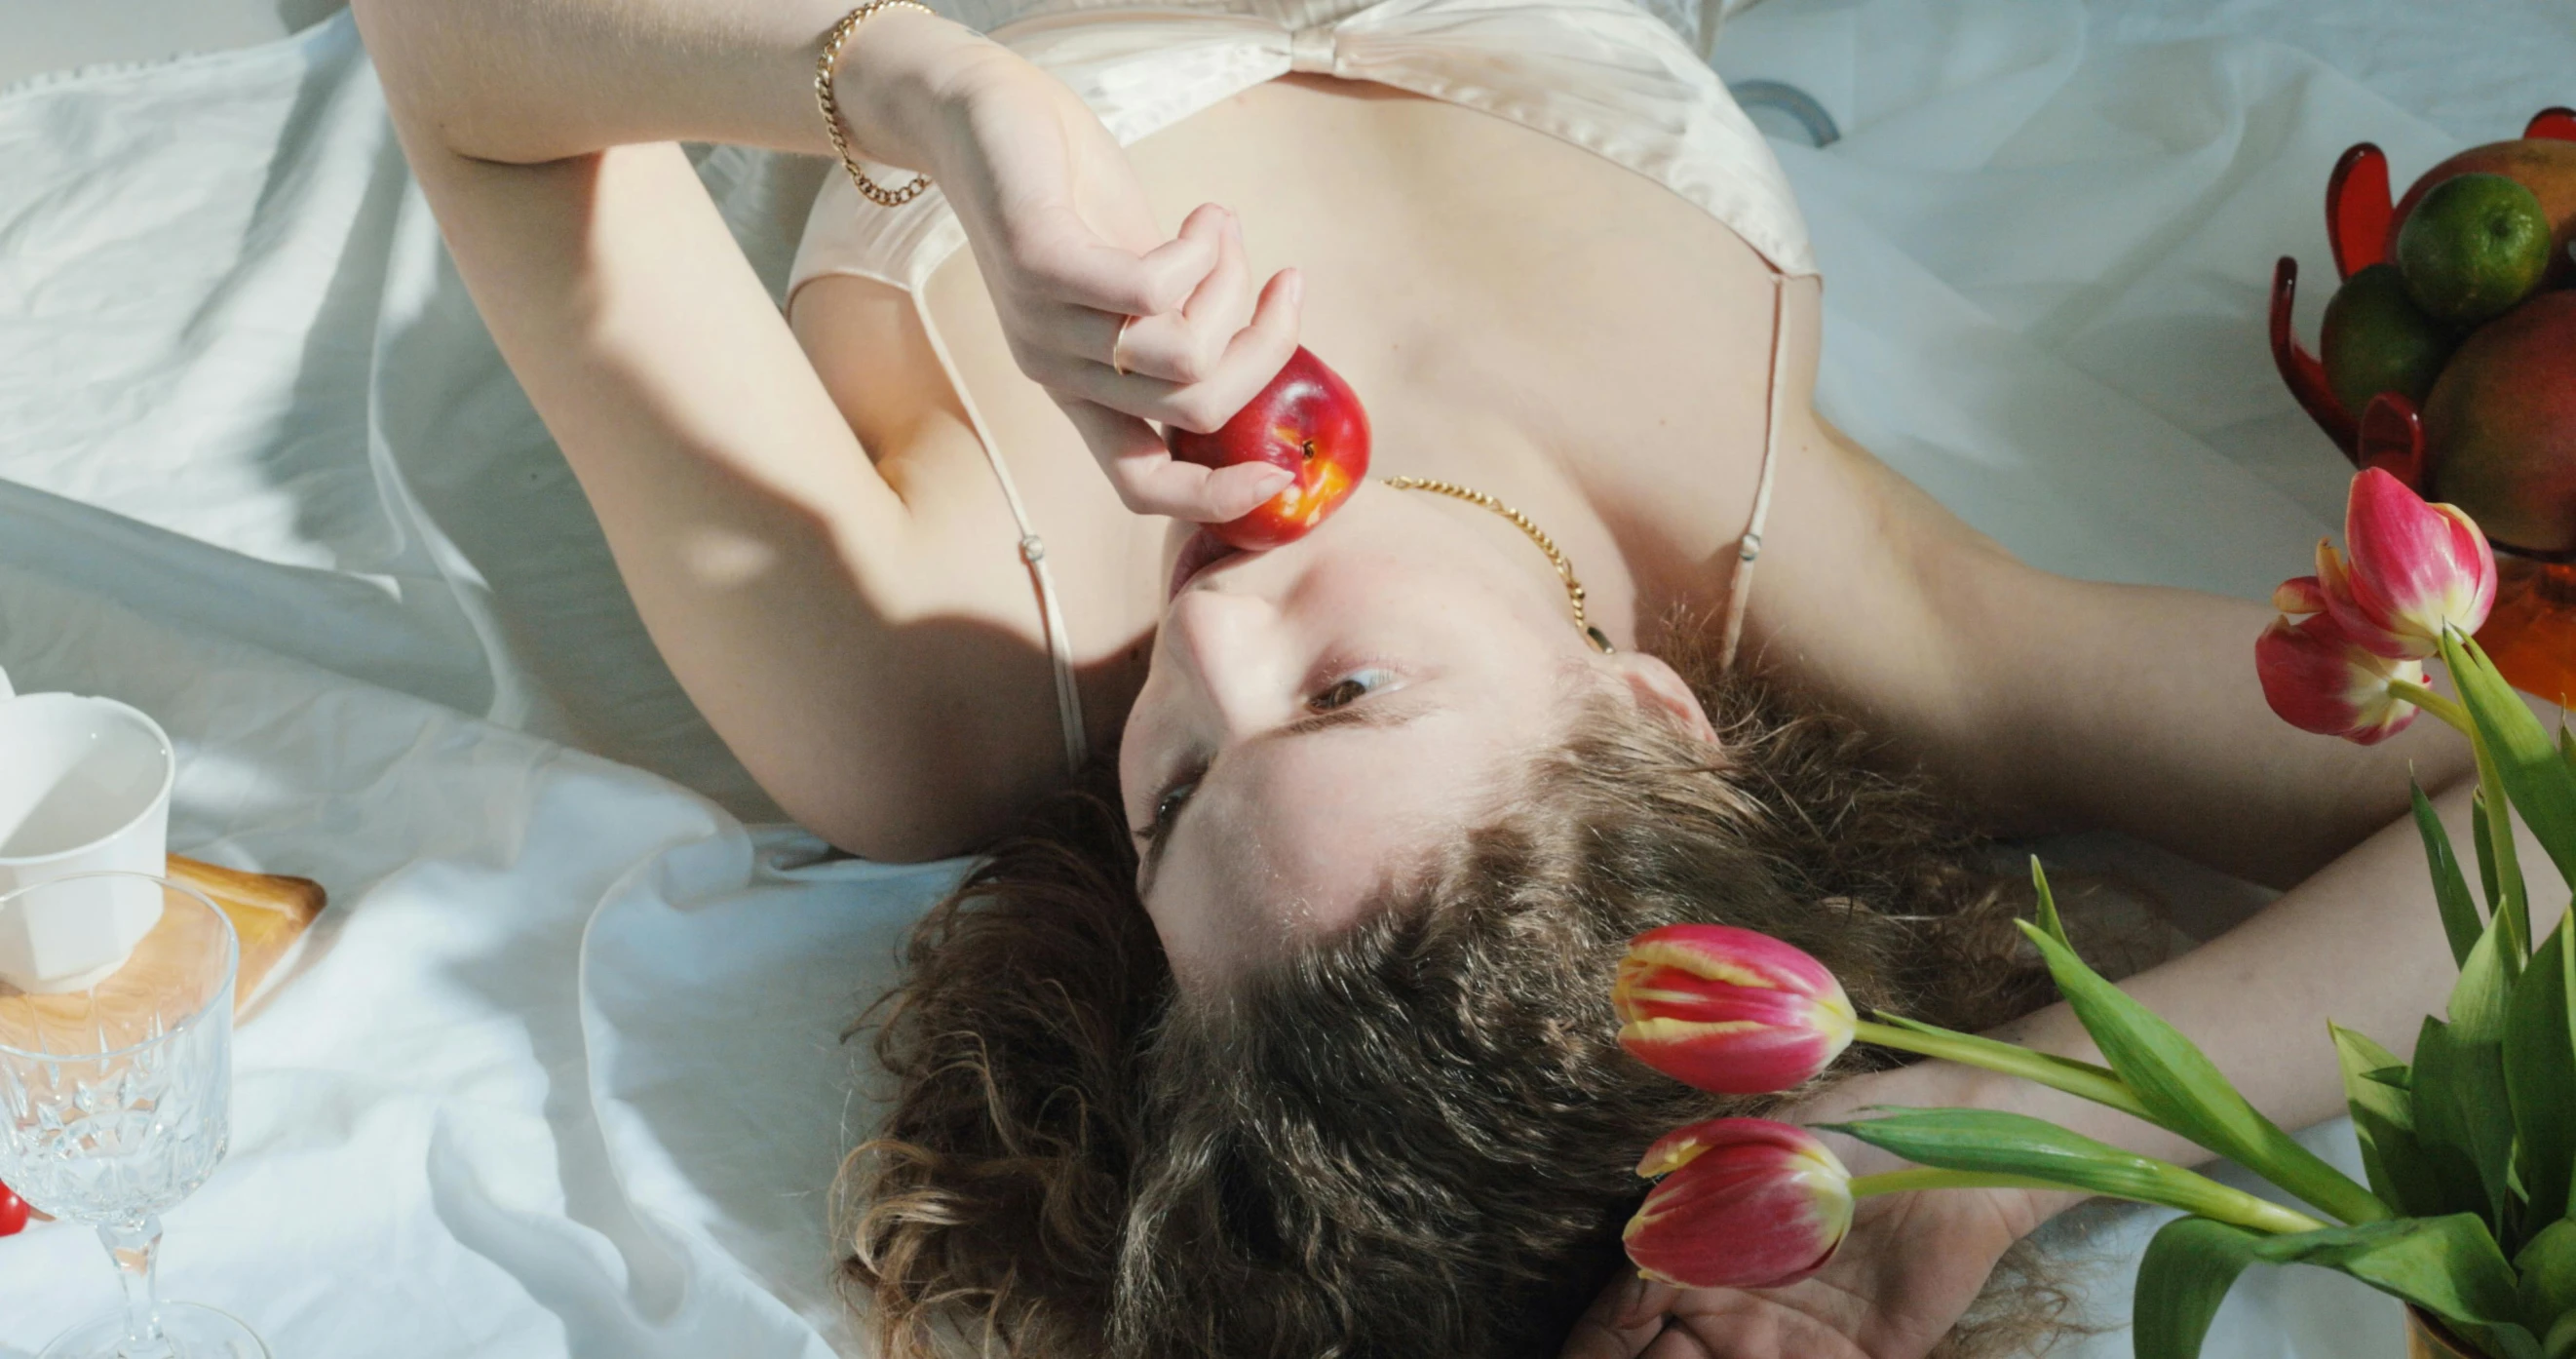 a woman laying on top of a bed next to flowers, inspired by Elsa Bleda, pexels contest winner, magic realism, she is eating a peach, red apple, hans bellmer and nadav kander, holding an epée